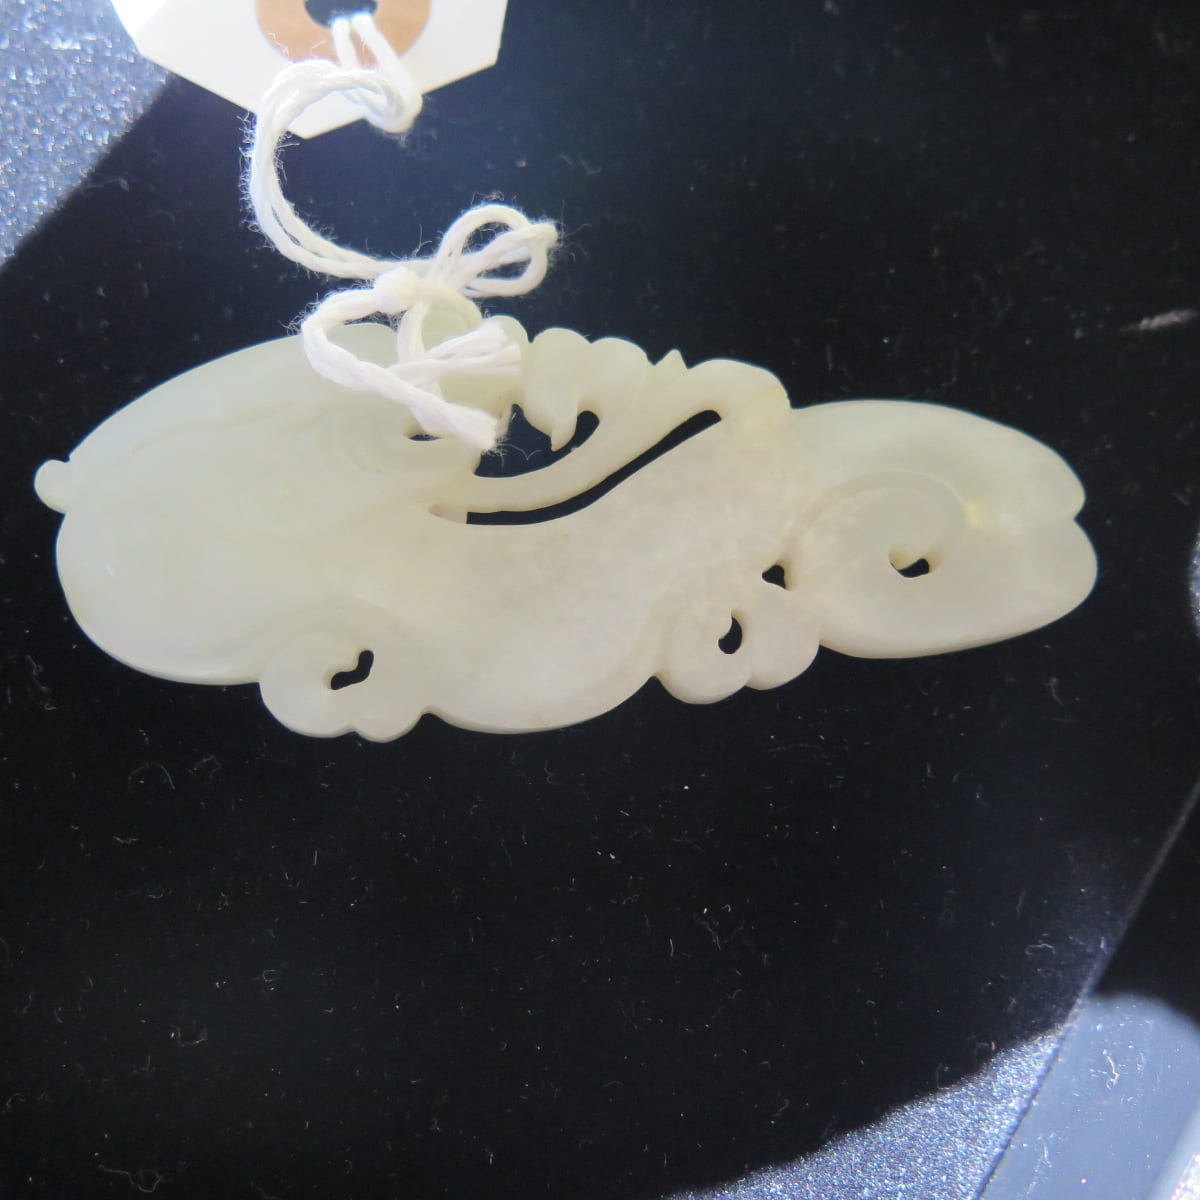 Lot 017: Group of 2: Chinese pale green Jade Pendant with a Dragon and a Silver Pin with carved Jade Fruit